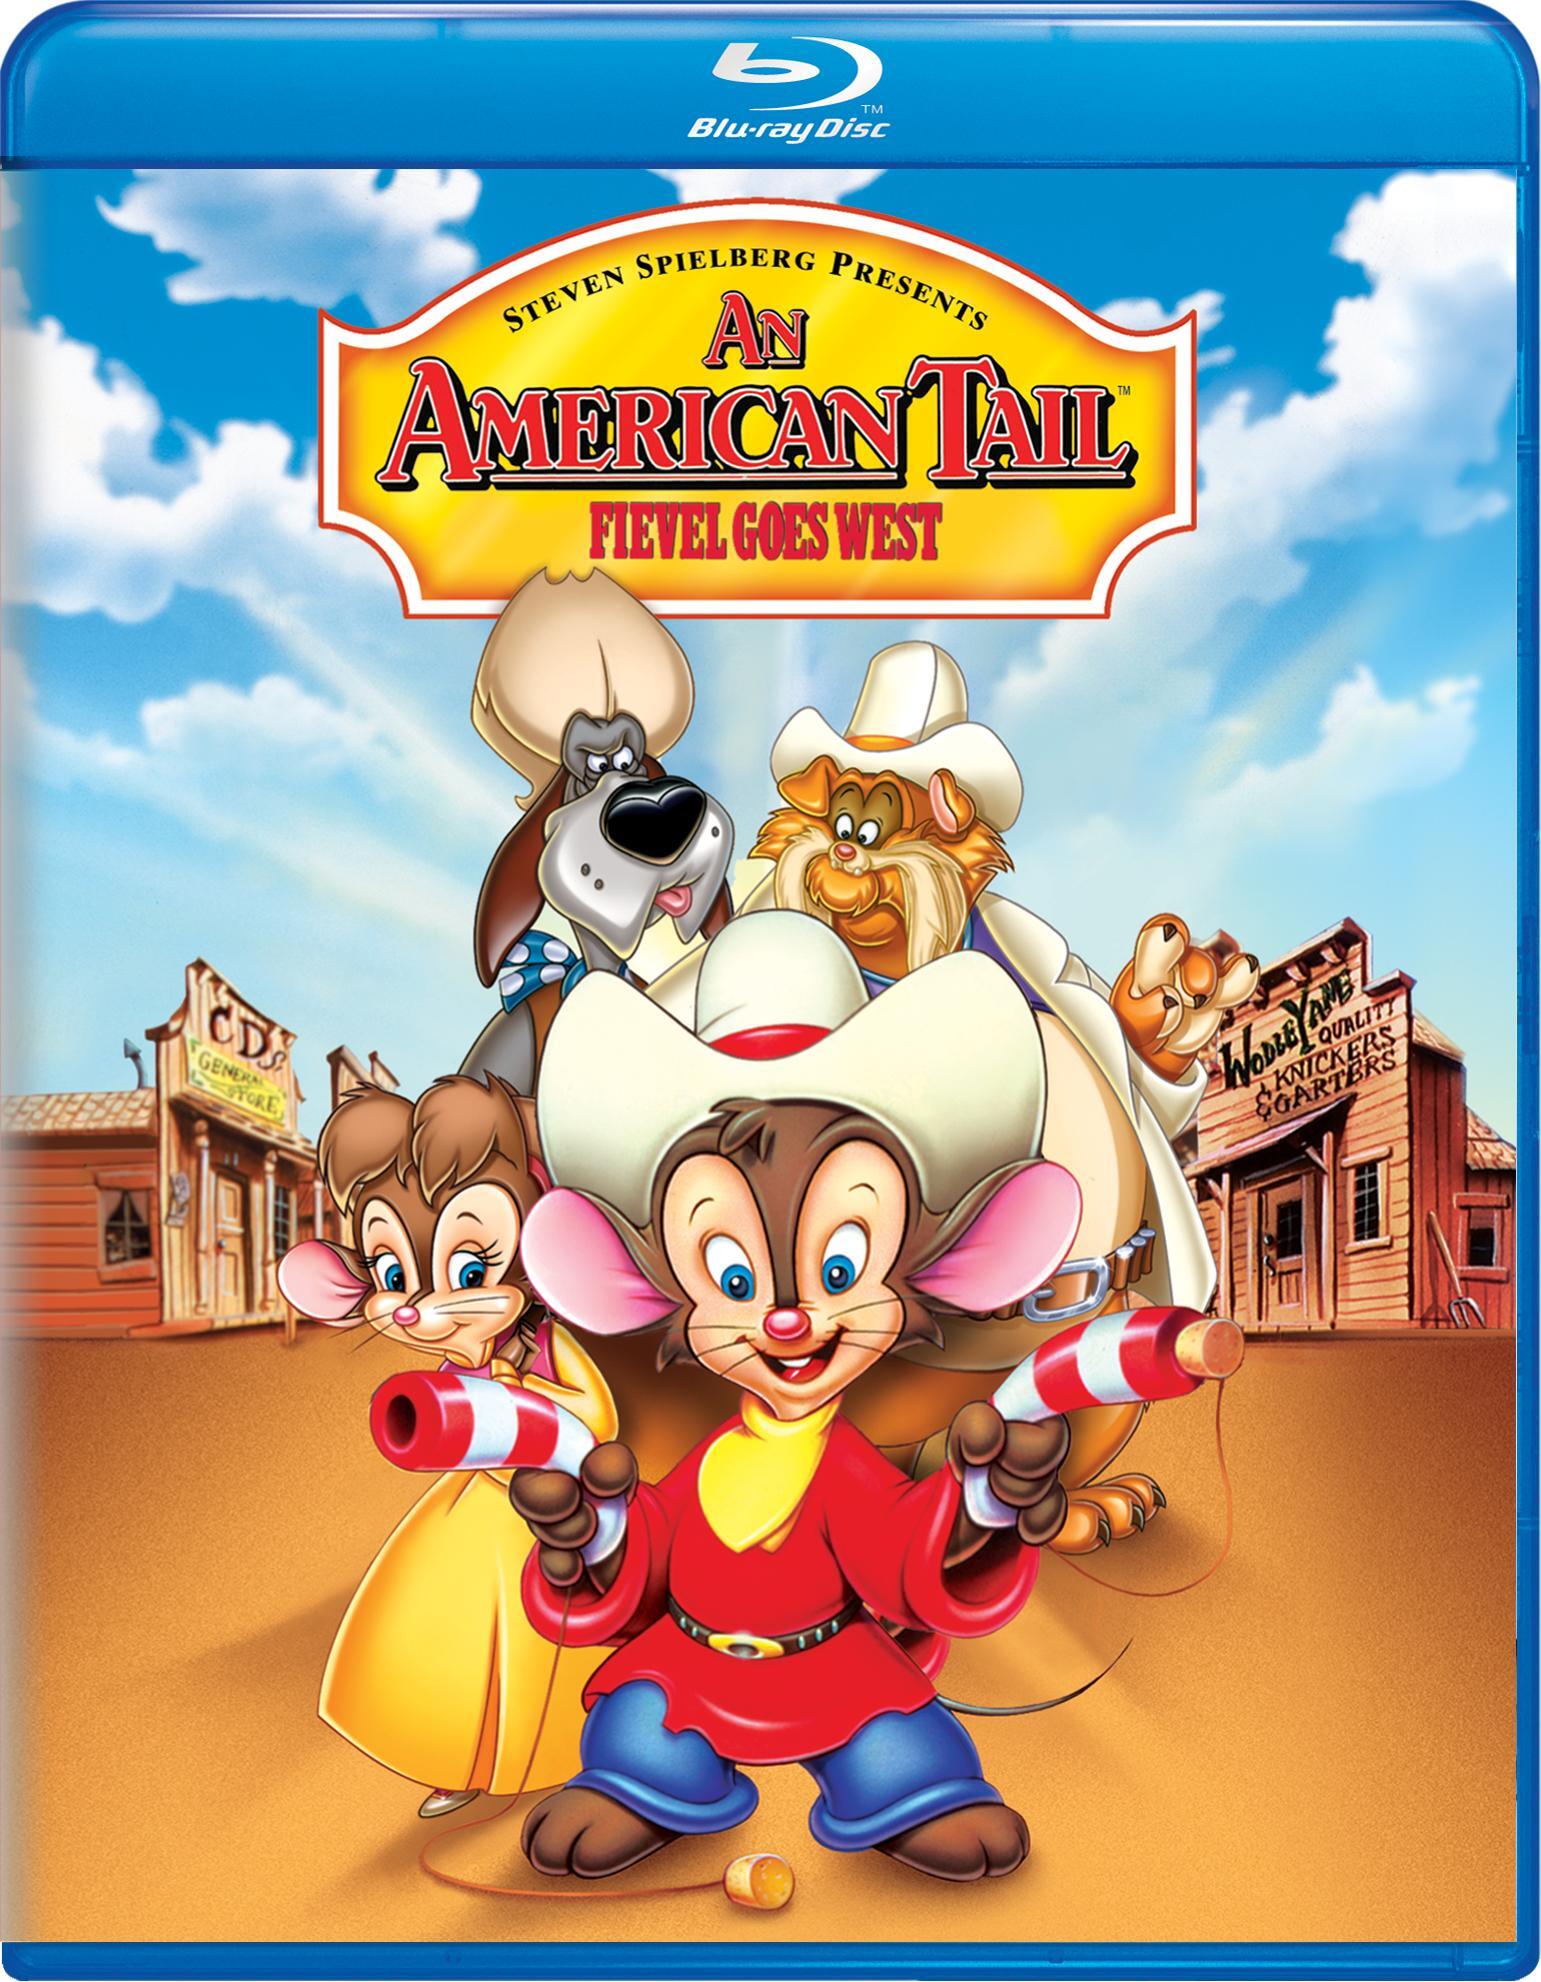 An American Tail: Fievel Goes West - Blu-ray [ 1991 ] - Children Movies on Blu-ray